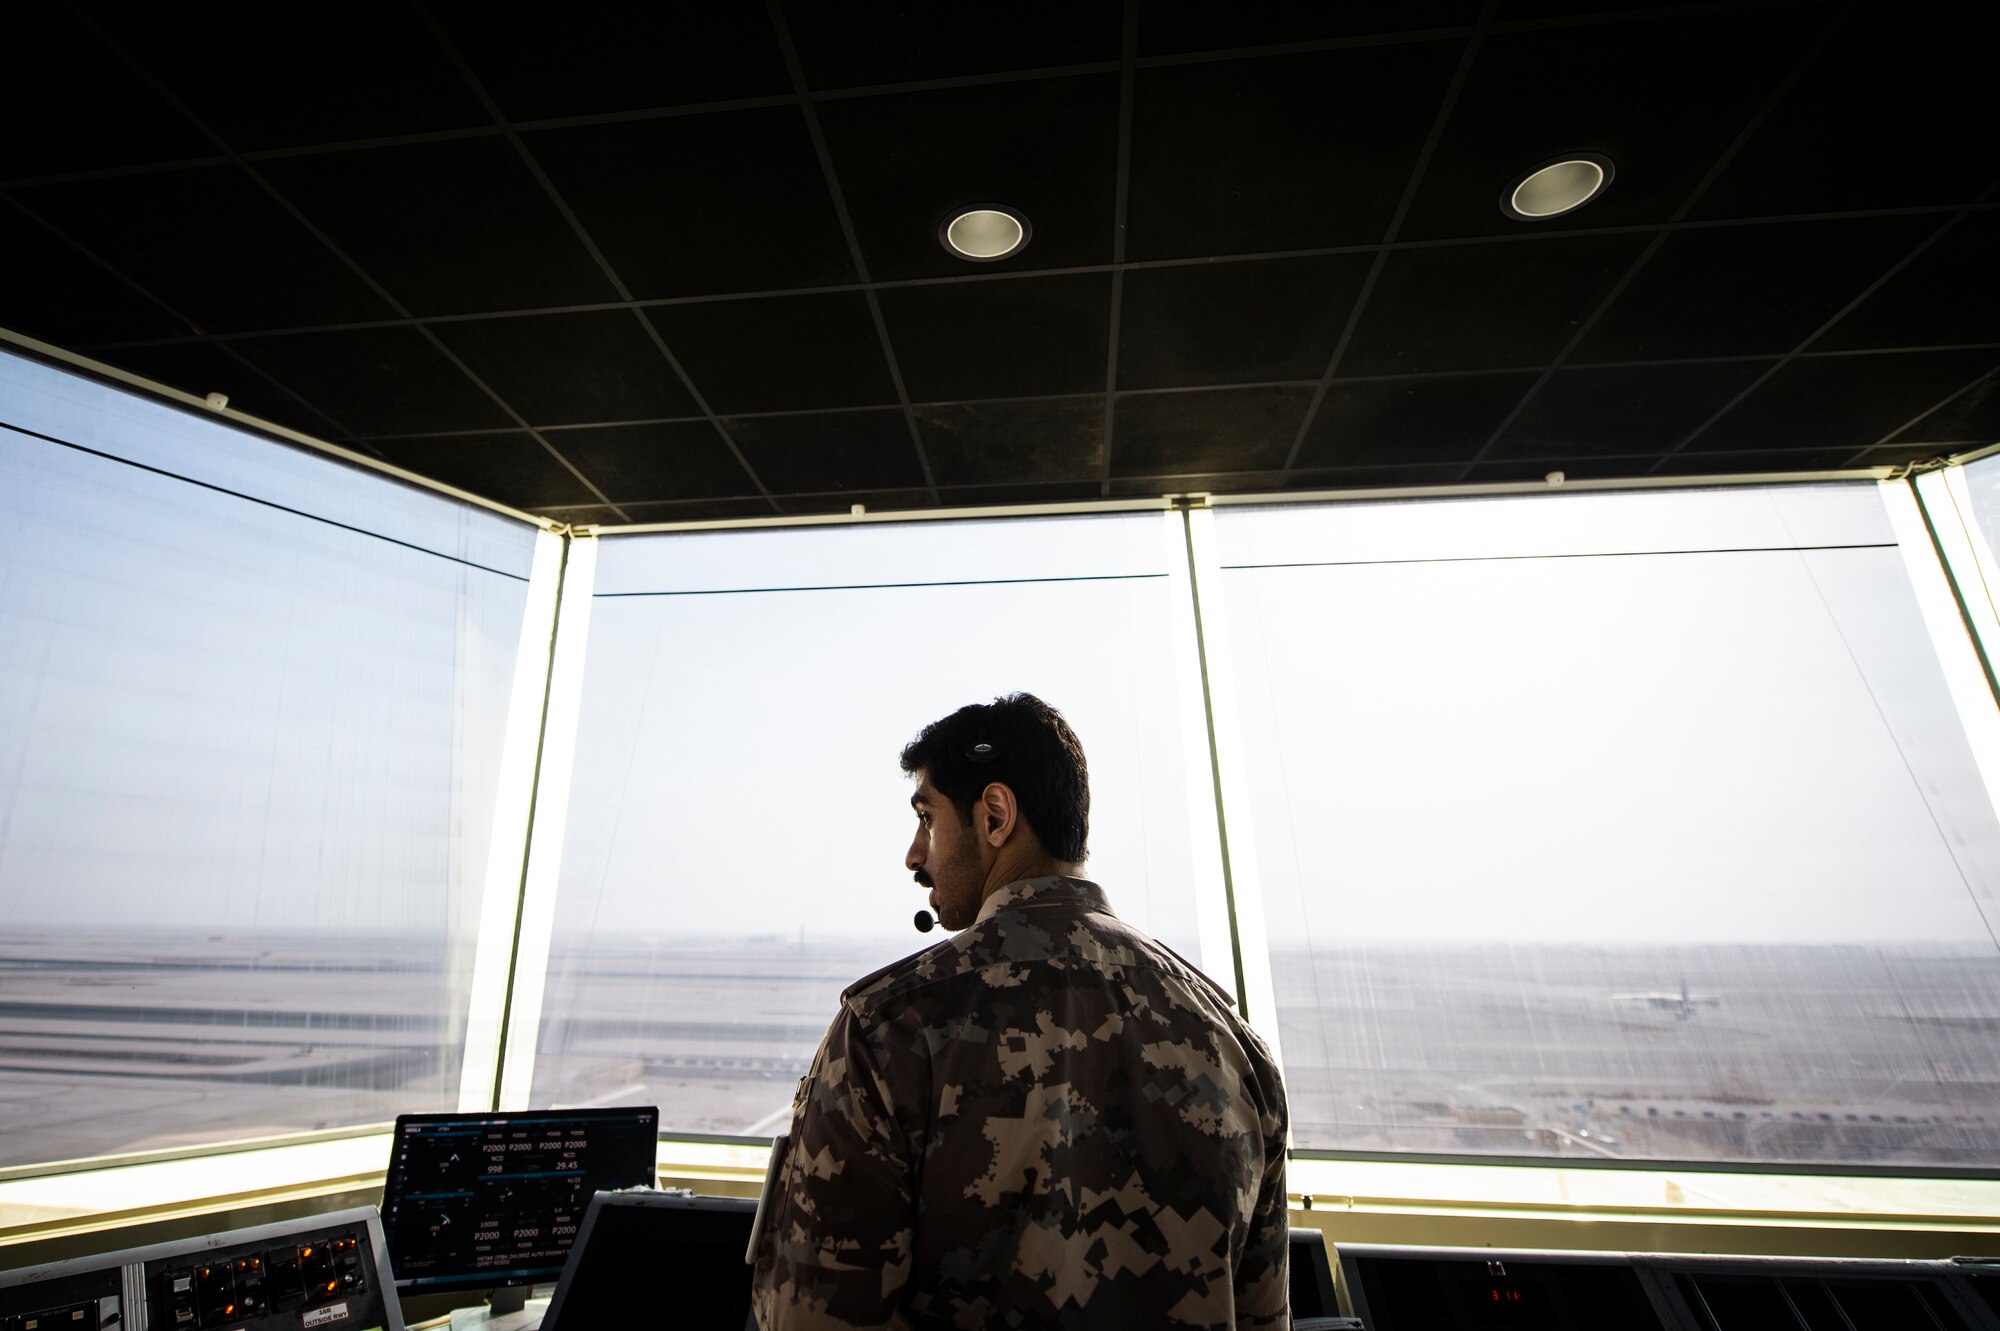 A member of the Qatar Emiri Air Force (QEAF) air traffic control tower directs aircraft at Al Udeid Air Base, Qatar, Aug. 24, 2020. A letter of agreement was recently implemented between the U.S., QEAF and Qatar Civil Aviation Authority to better work together to ensure safe air space operations. (U.S. Air Force photo by Master Sgt. Larry E. Reid Jr.)